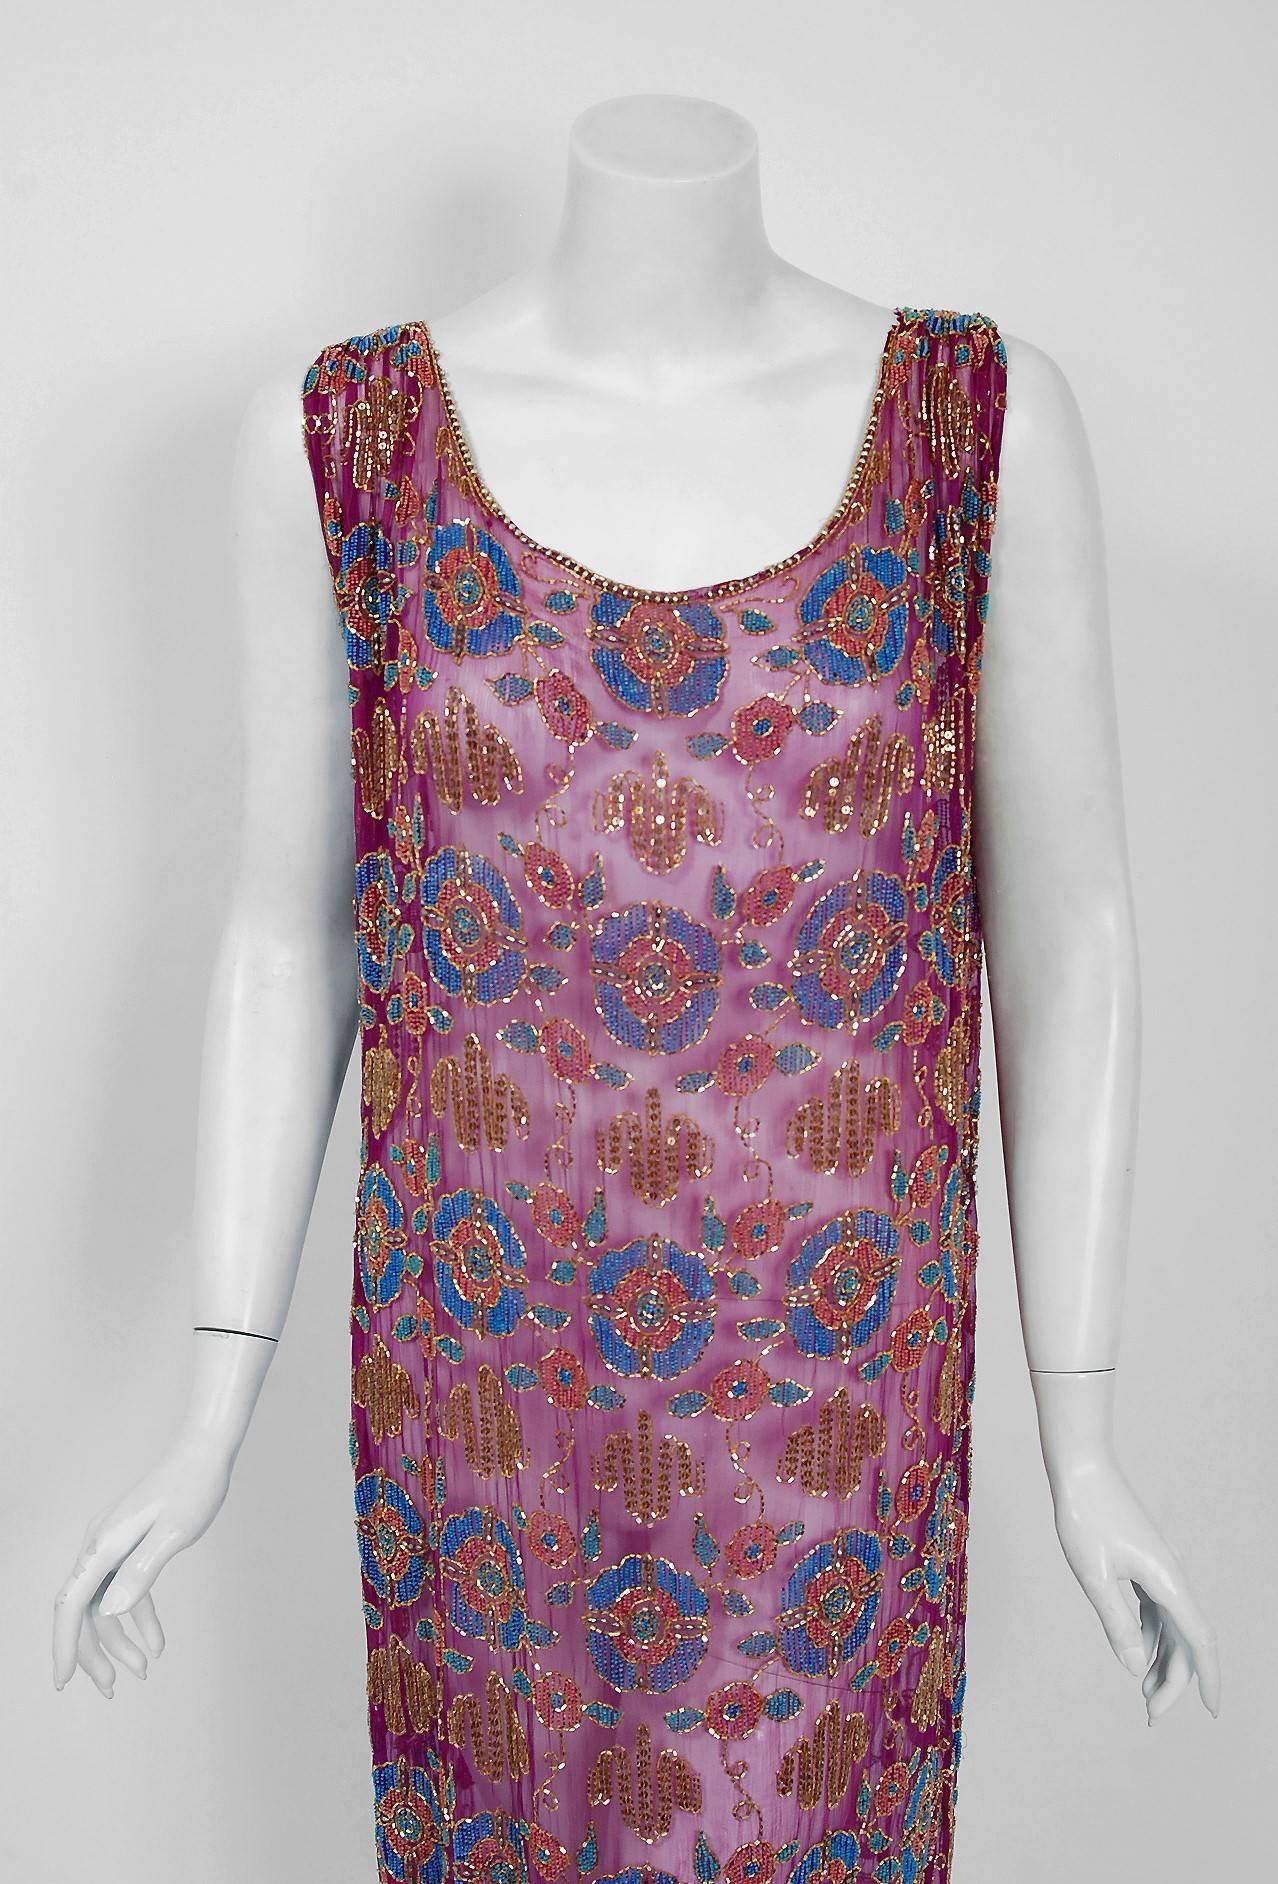 Romantic flapper dresses from the early 20th century are perennial favorites and this one is a show-stopper. The garment's simple unstructured style is so modern yet the fine couture beadwork is a treasure trove of needle art. The beading, made up